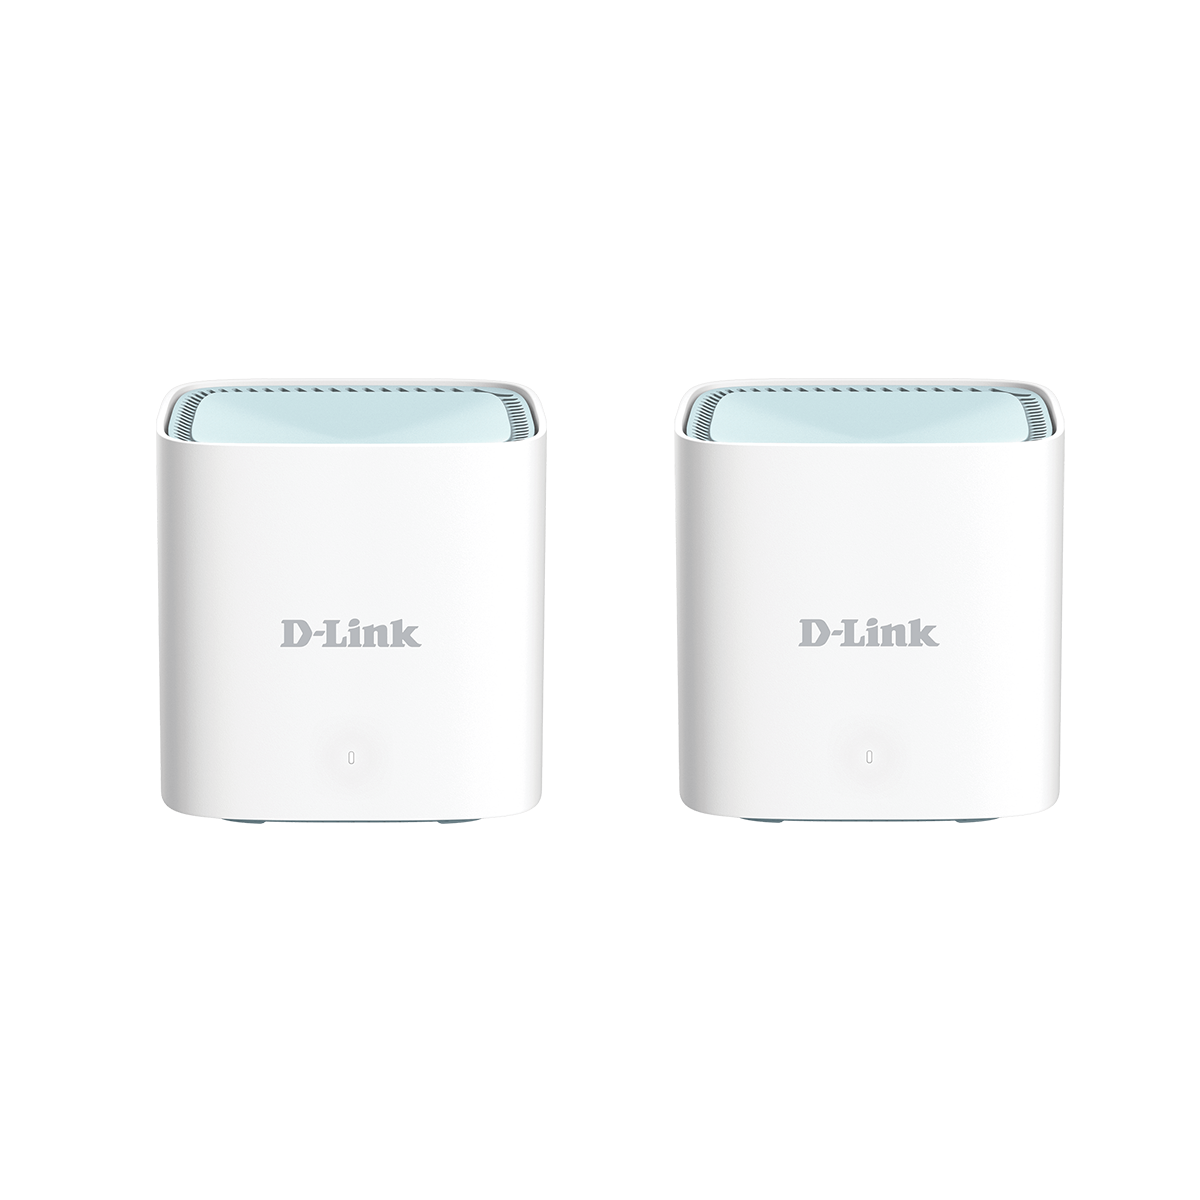 AX1500 Wifi 6 Eagle Pro AI Wireless Mesh Router System | M15 (2 Pack)